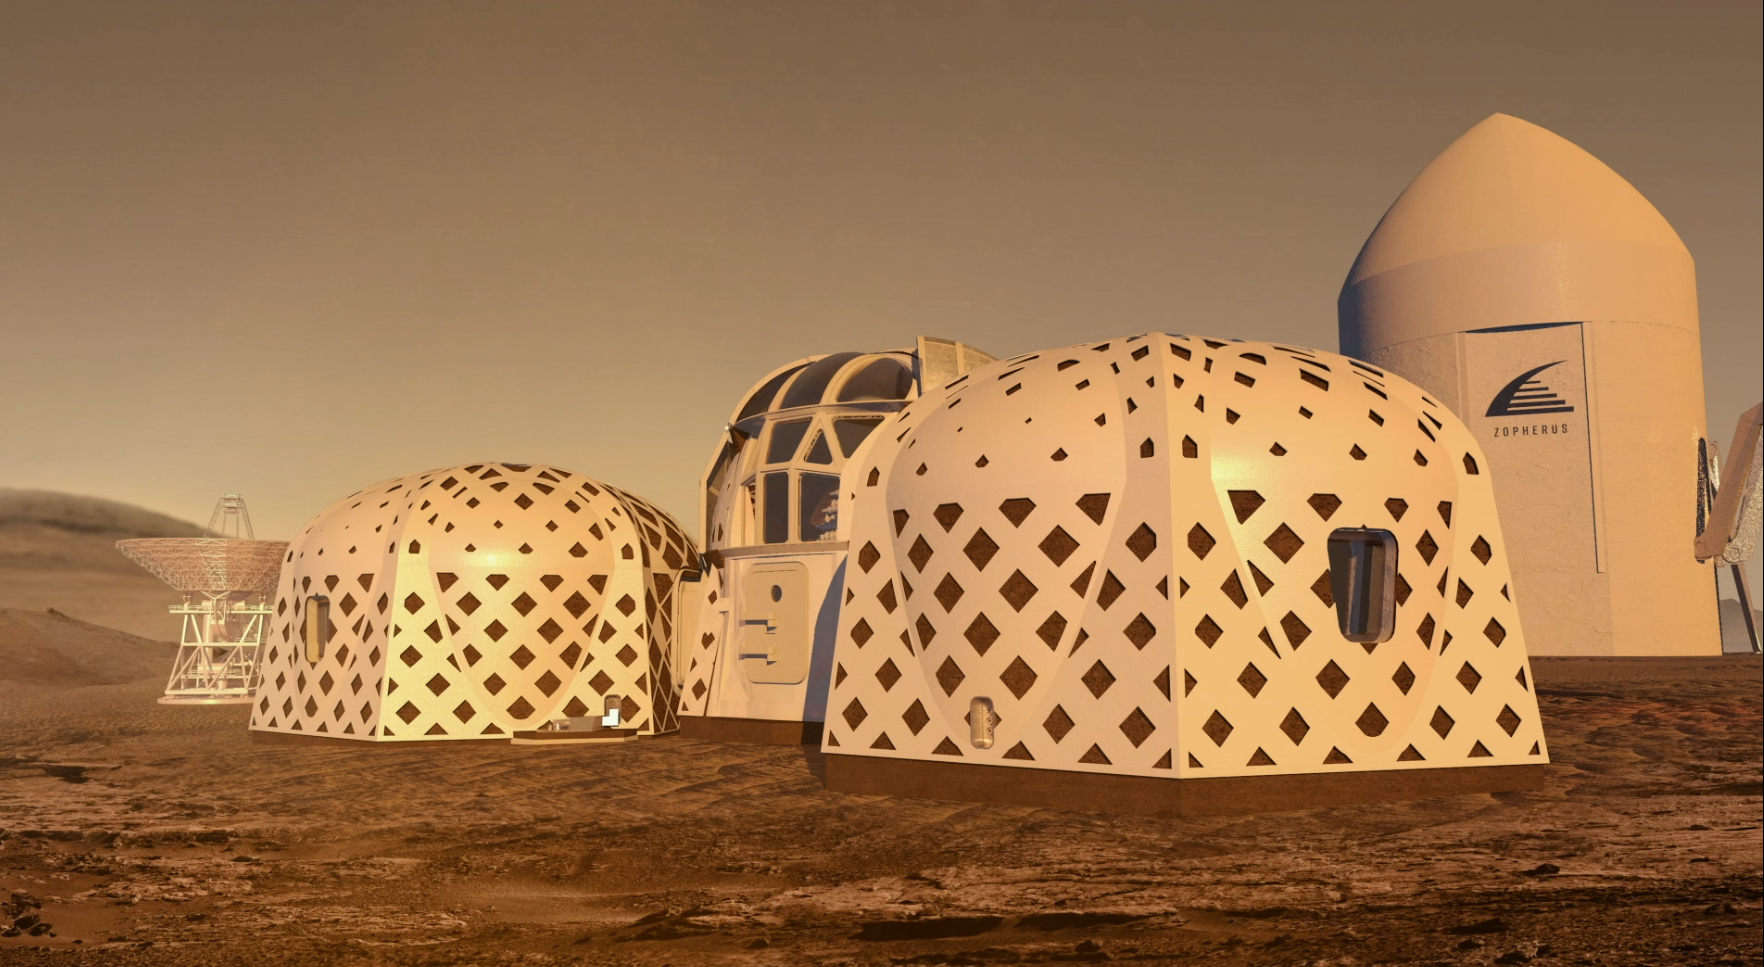 And finally... NASA unveils winners of 3D-printed habitat challenge competition